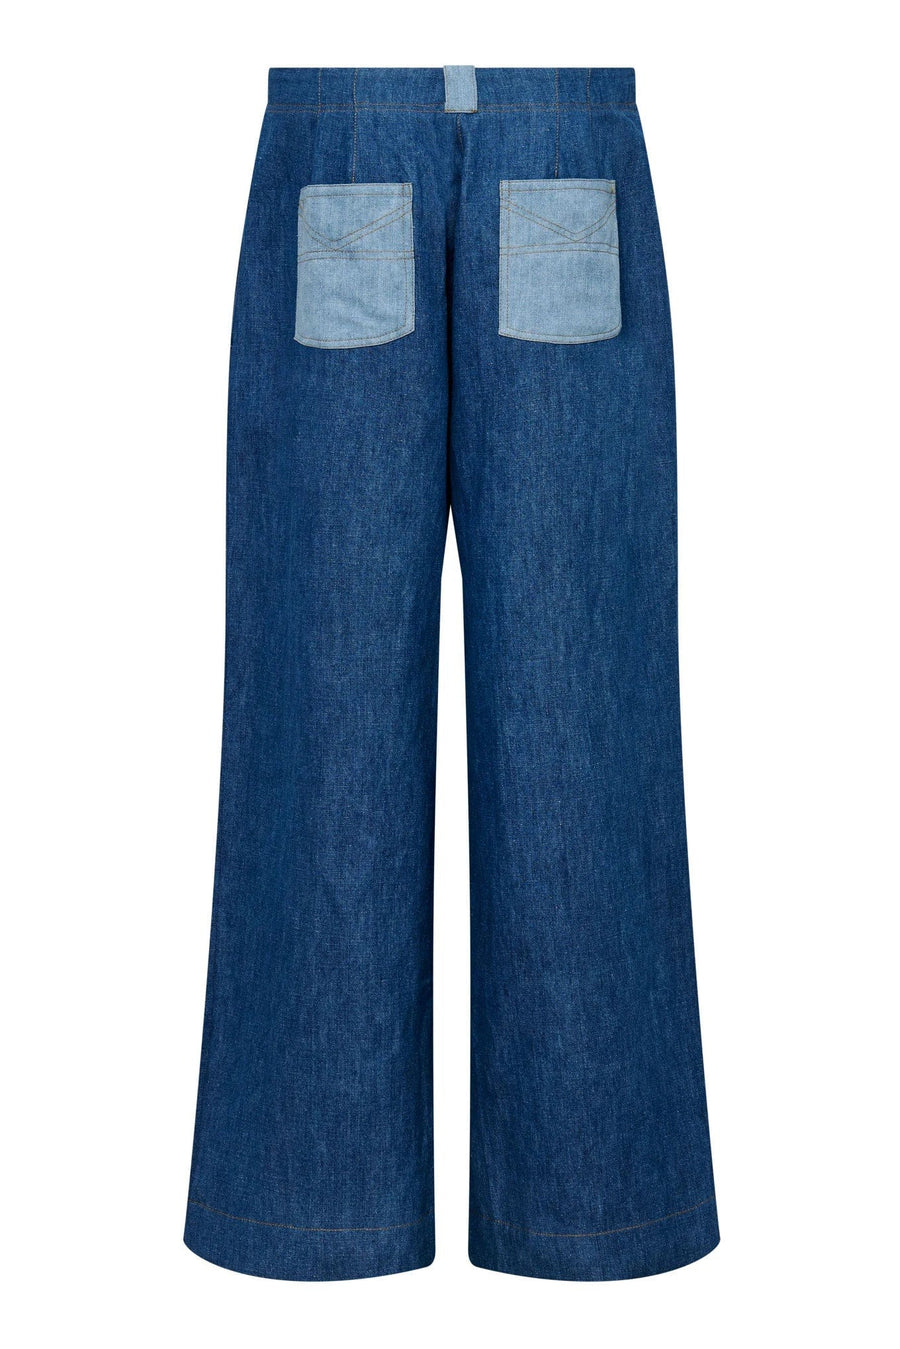 Lola Trousers Blue Patchwork